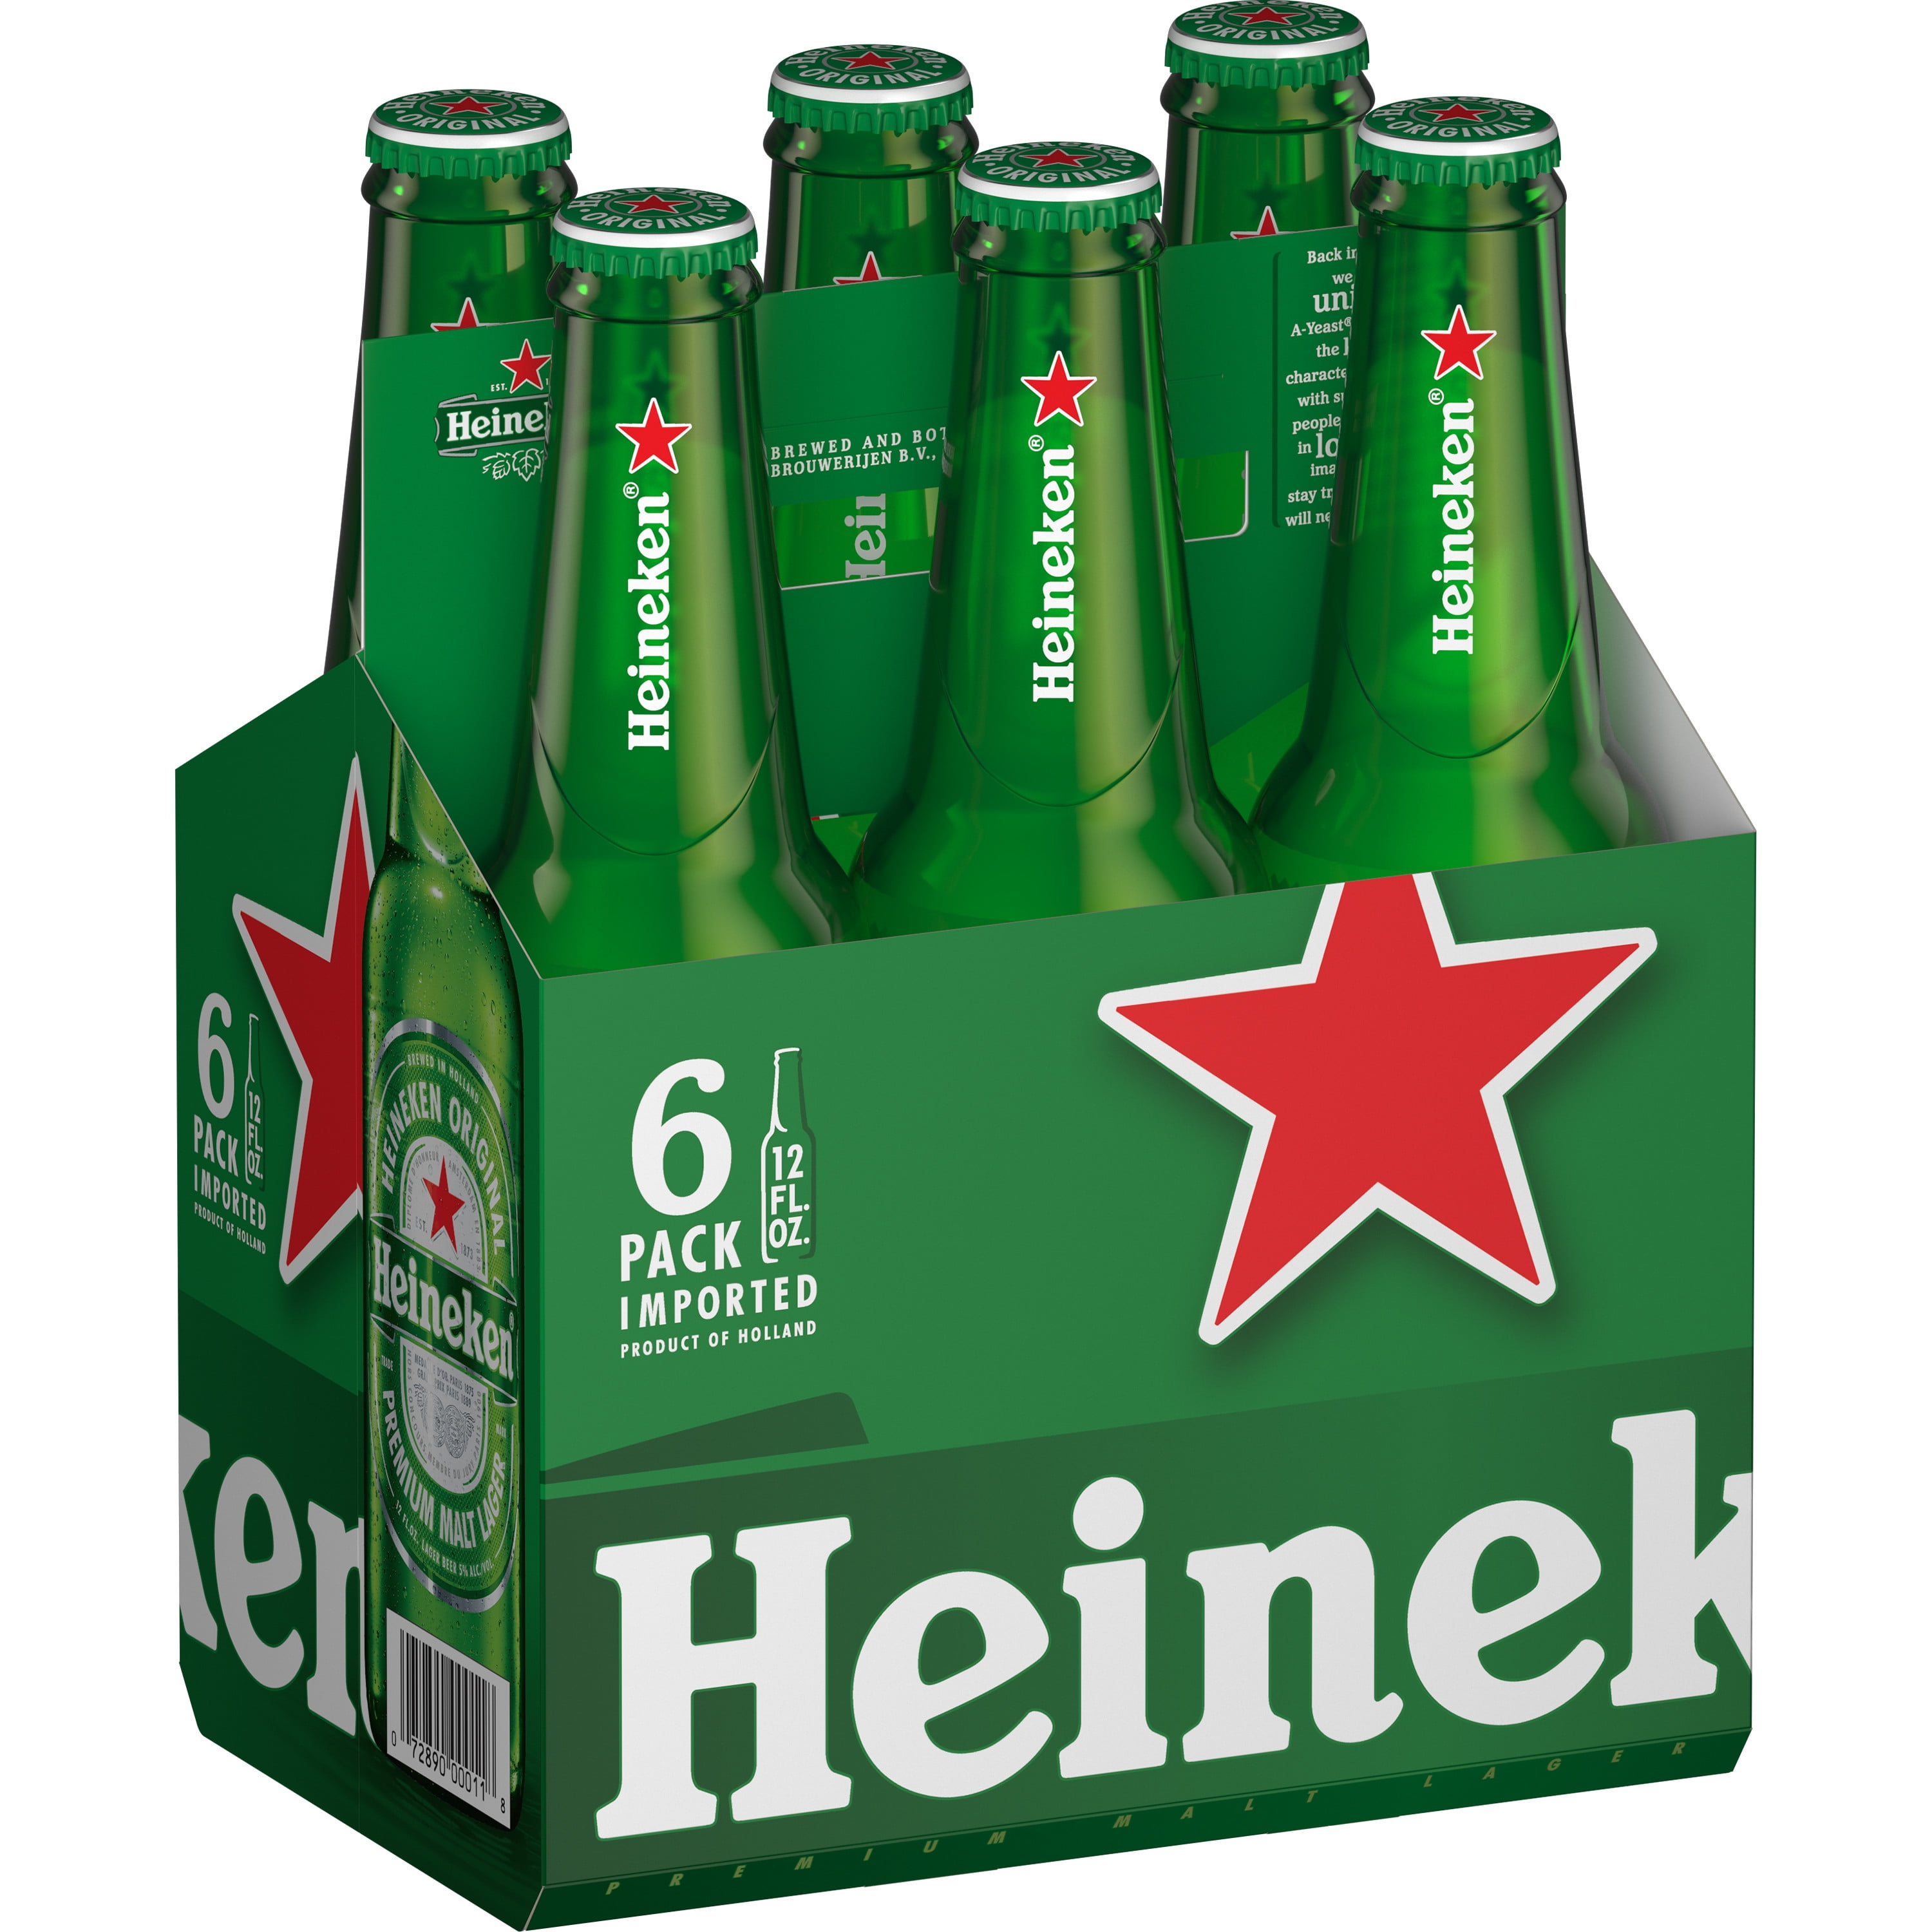 Heineken Sign Stand Up Or Wall Mount Imported Holland Beer 